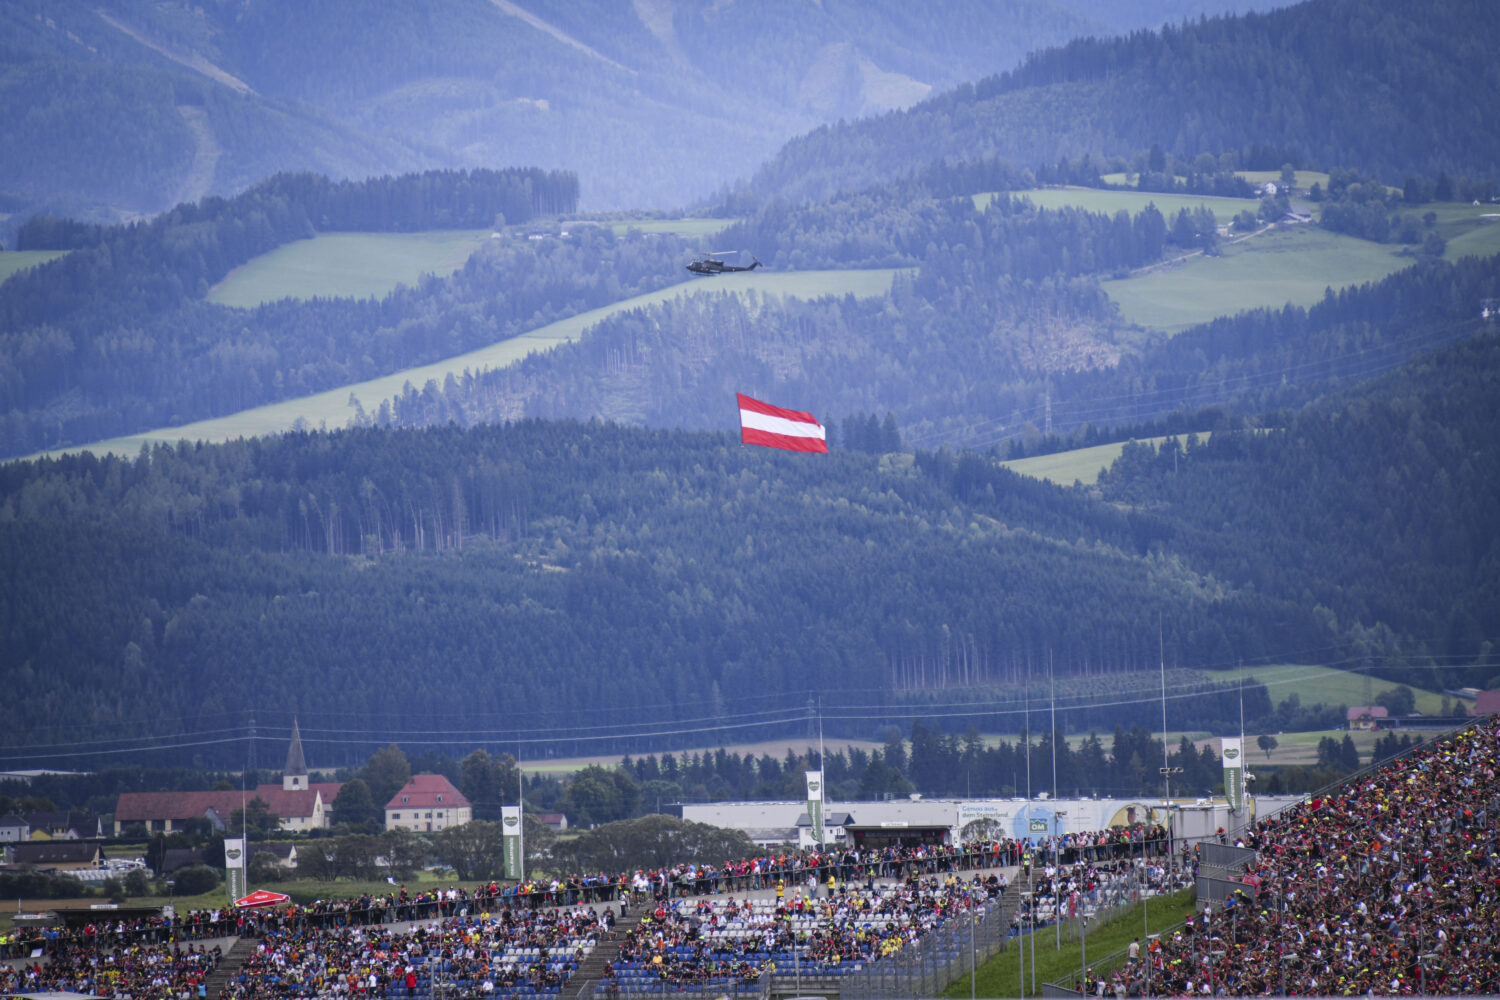 Air Show - Helikopter mit Österreich Flagge